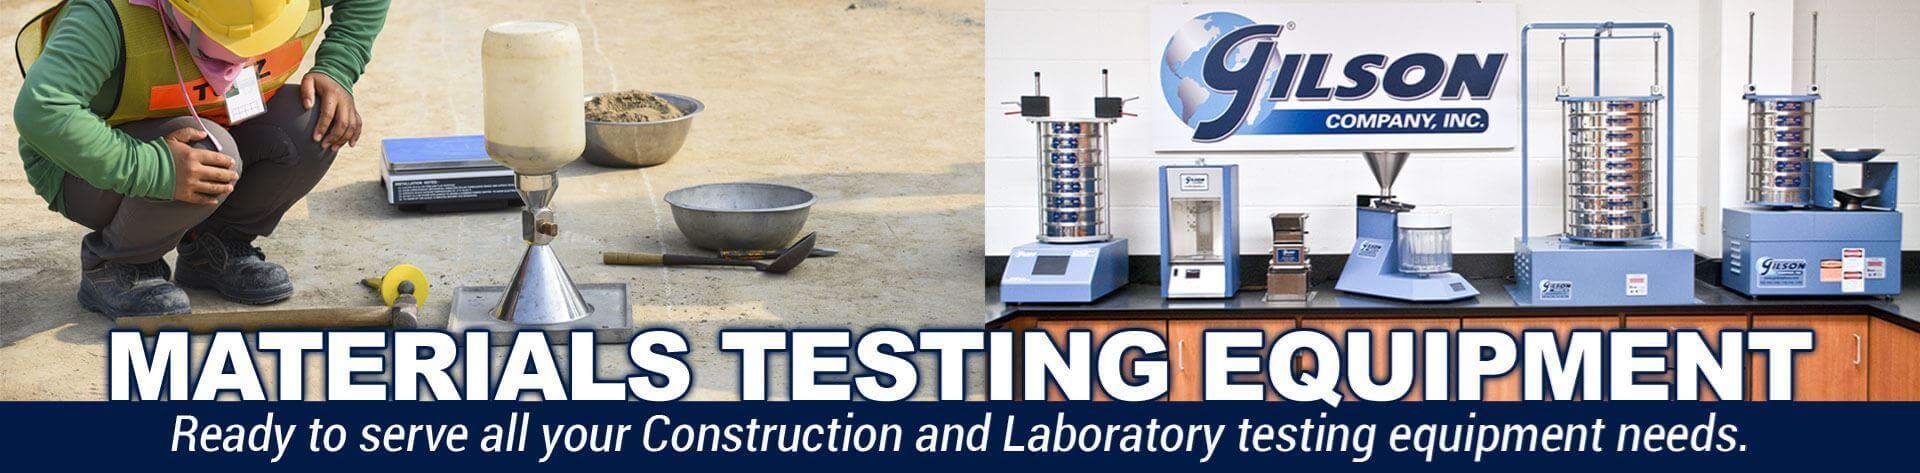 Construction Materials Testing Equipment and Laboratory Testing Equipment